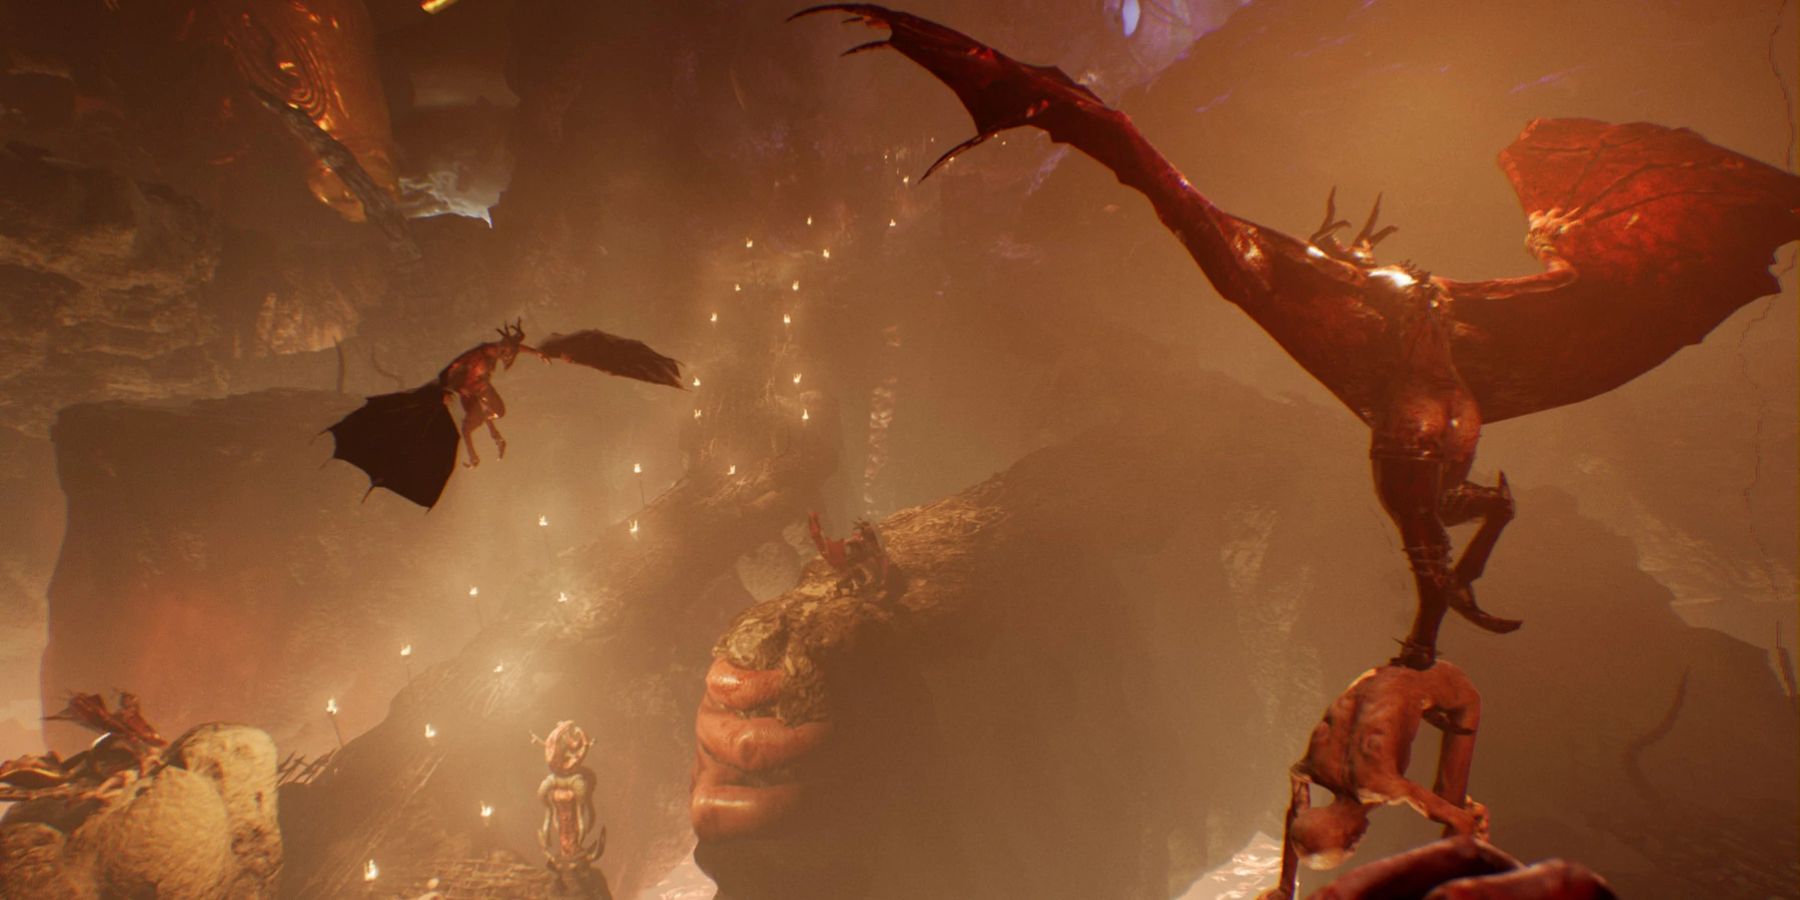 Winged demons carry tortured souls in hell in the video game Agony.